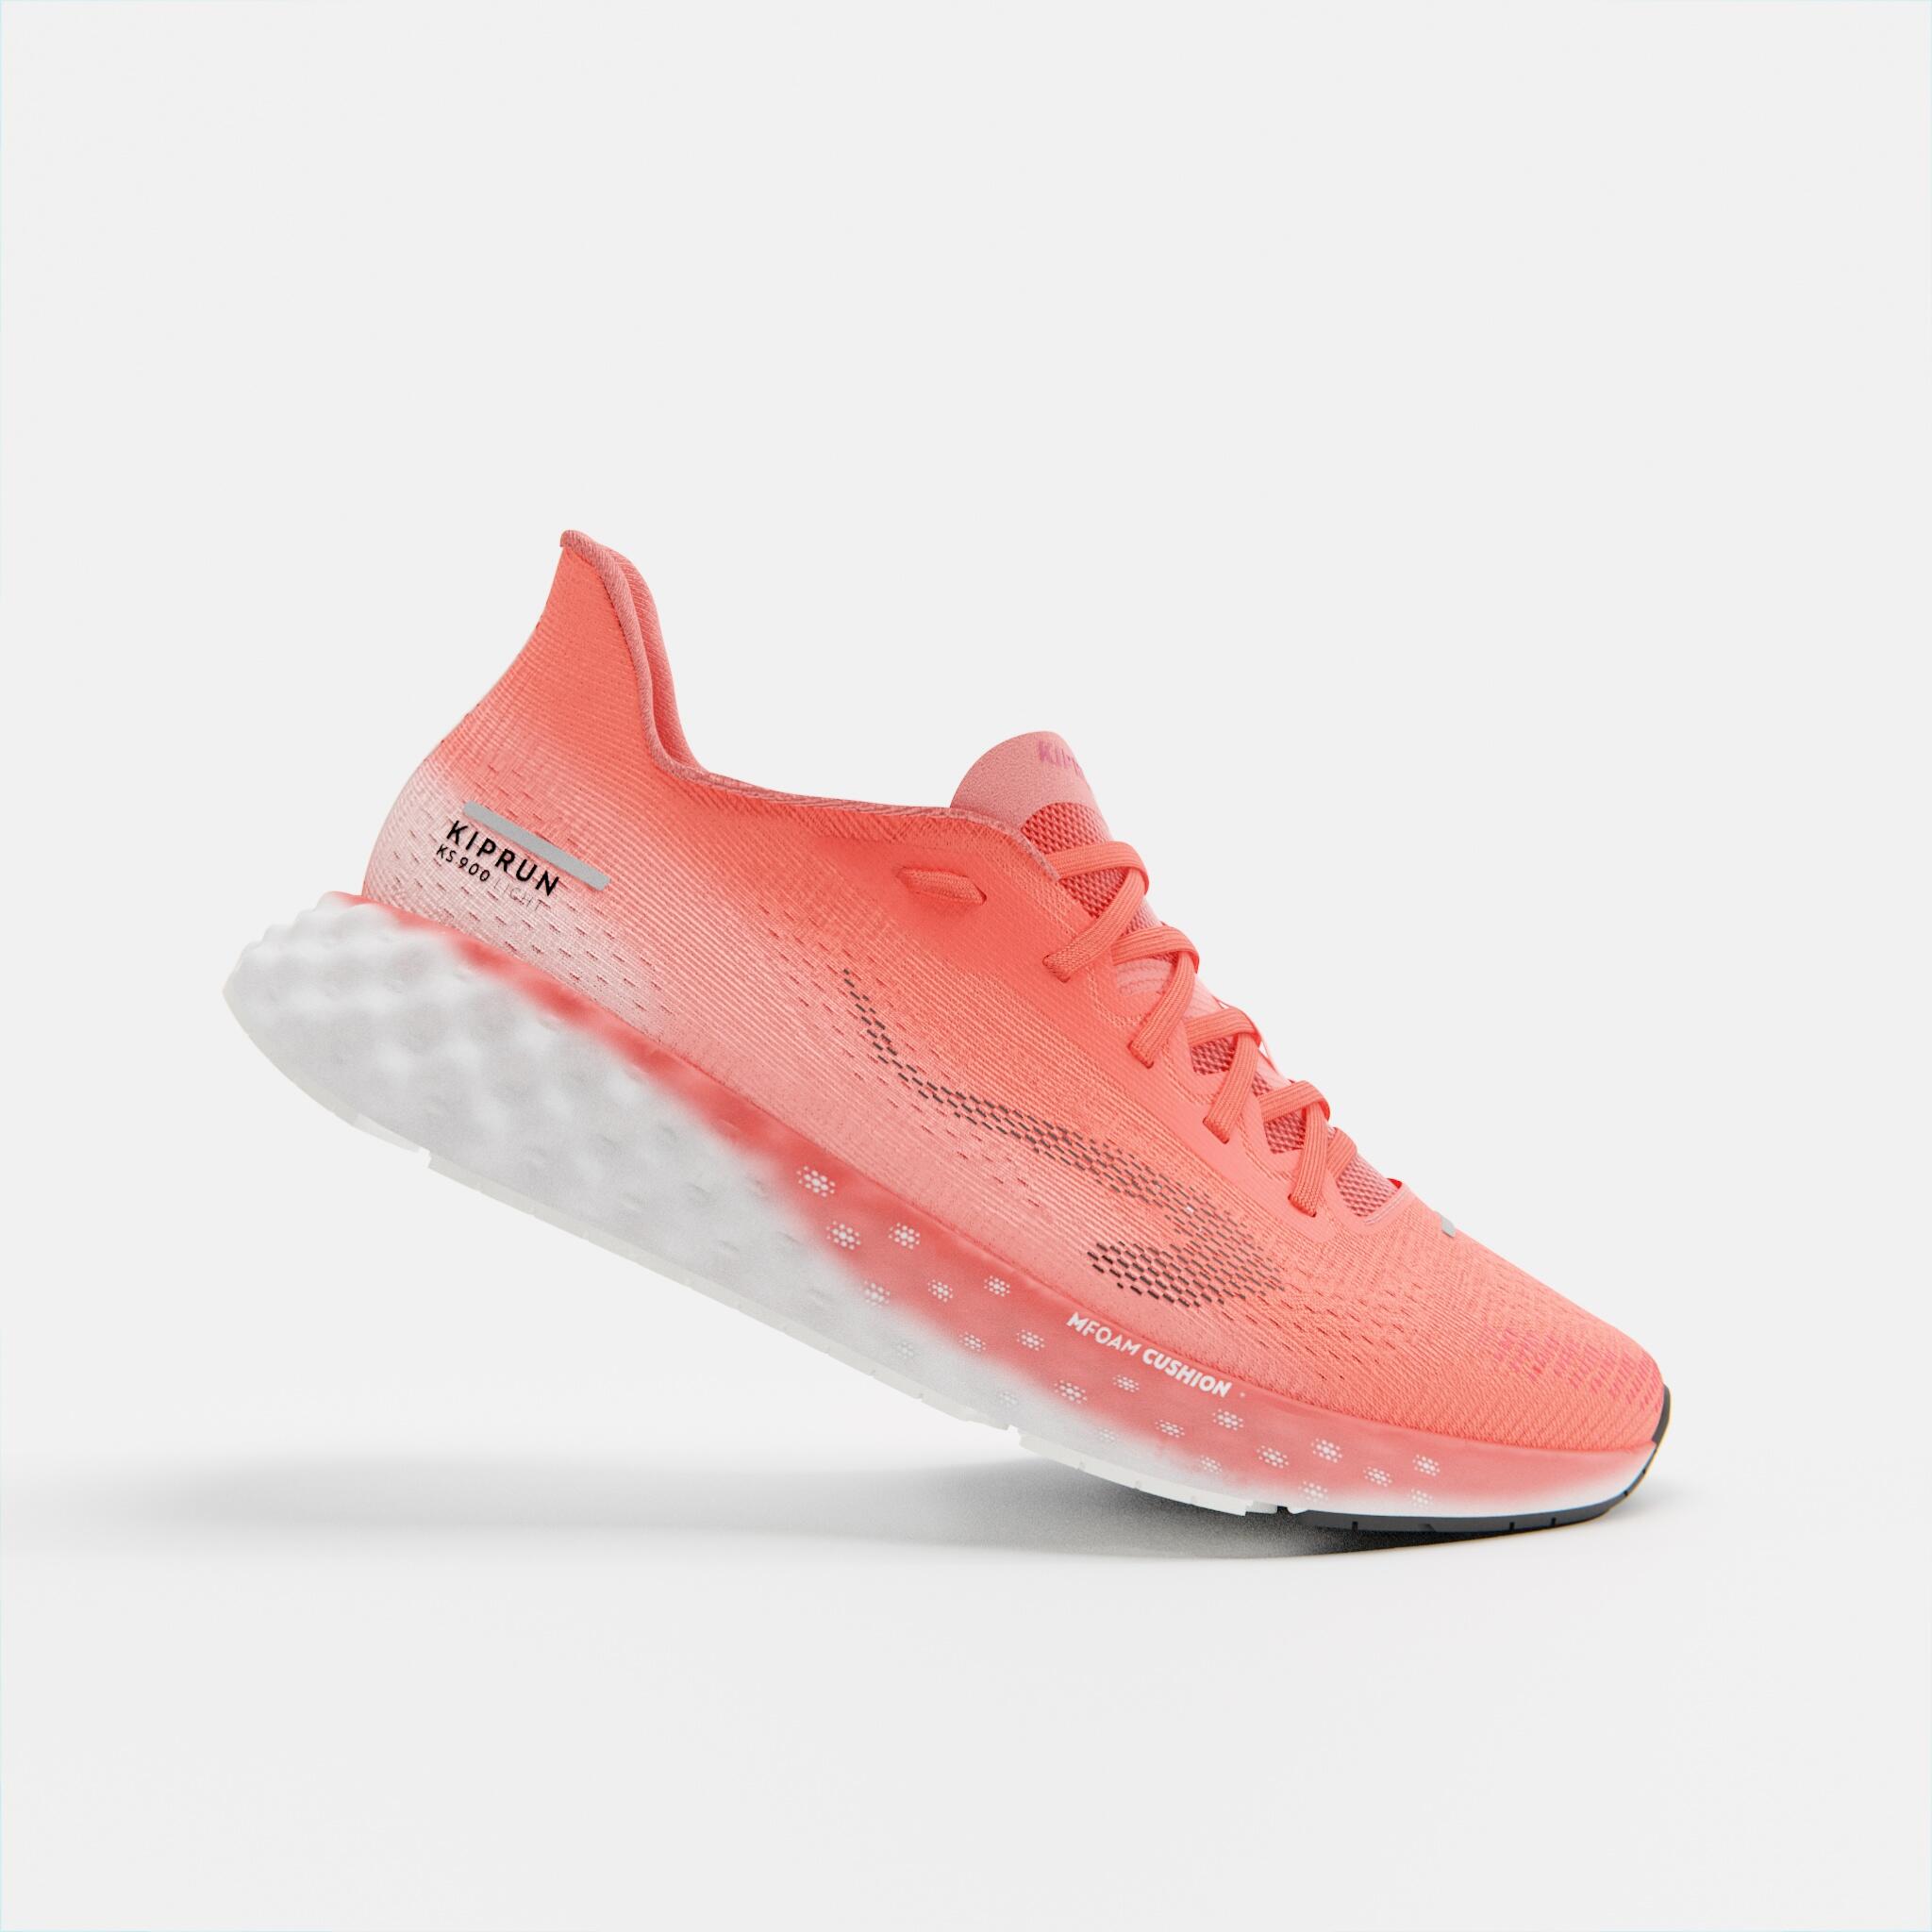 Image of Women’s Running Shoes - KS 900 Light Coral